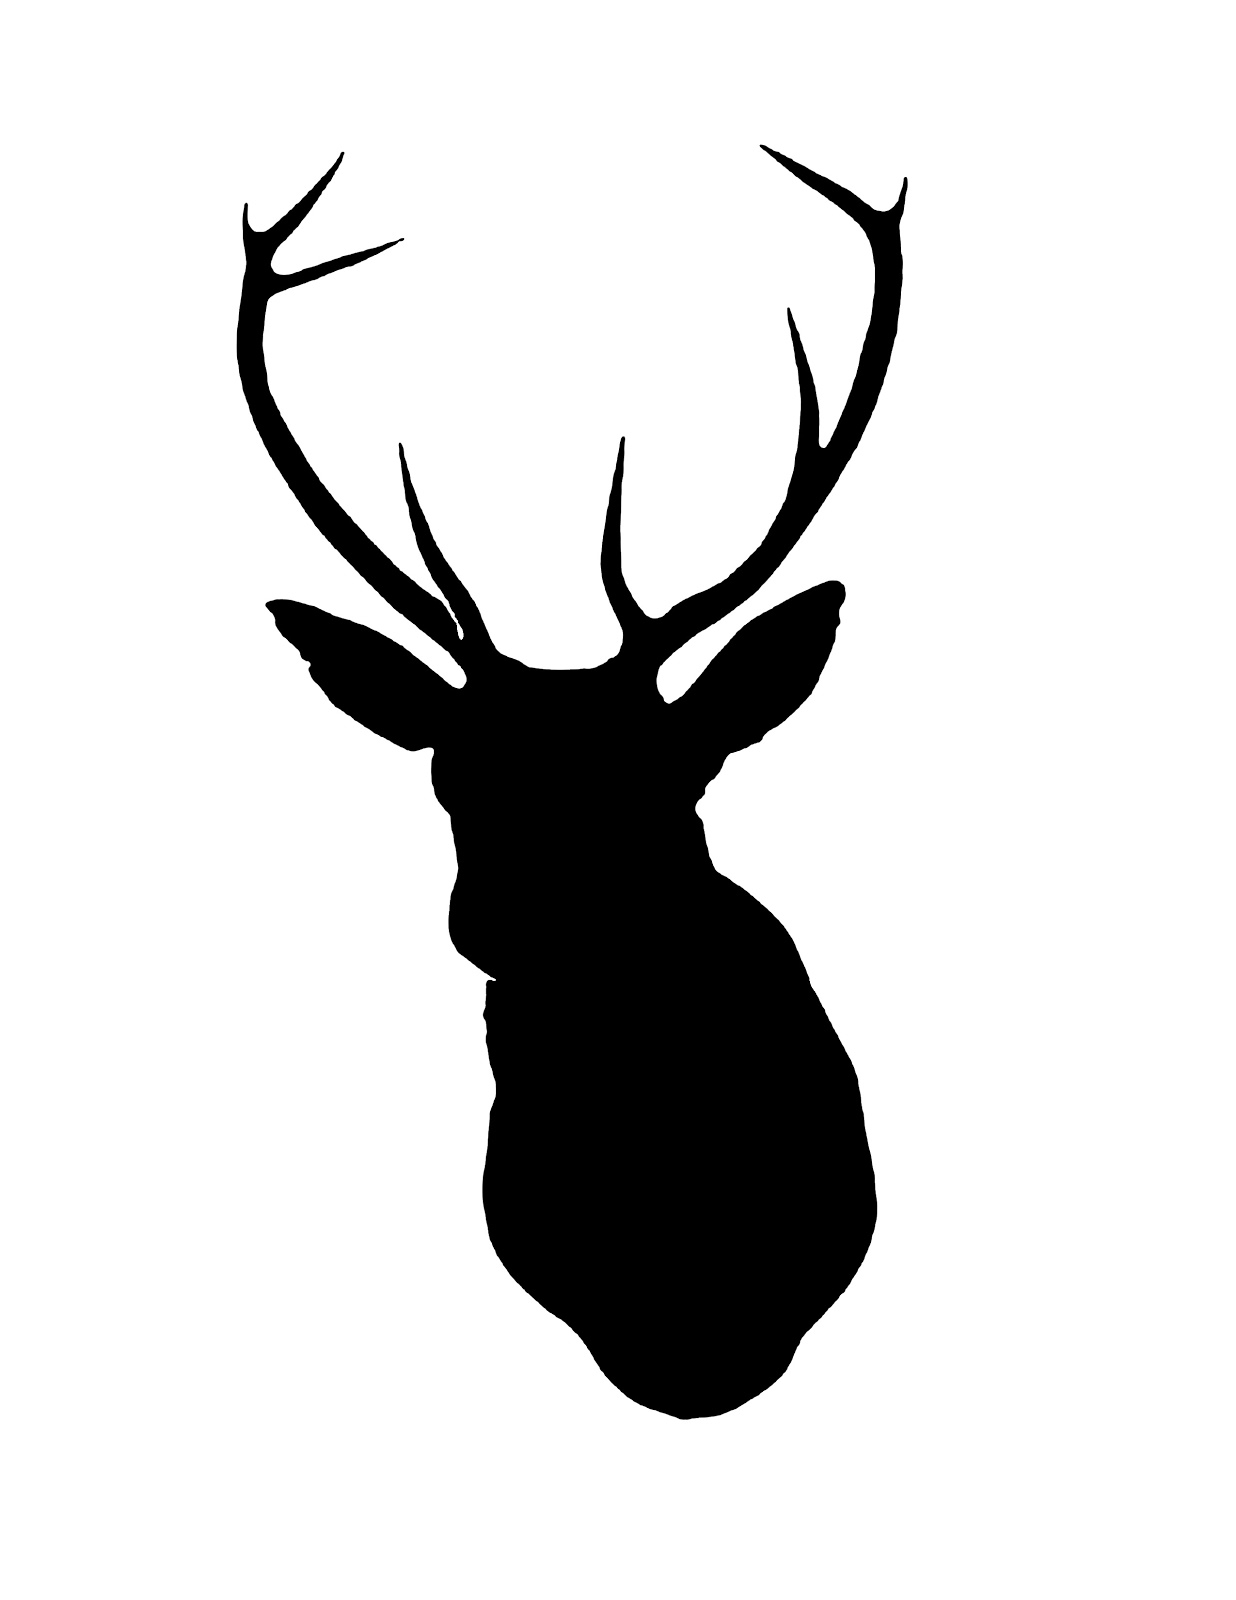 How To Draw A Deer Head Silhouette | picturespider.com